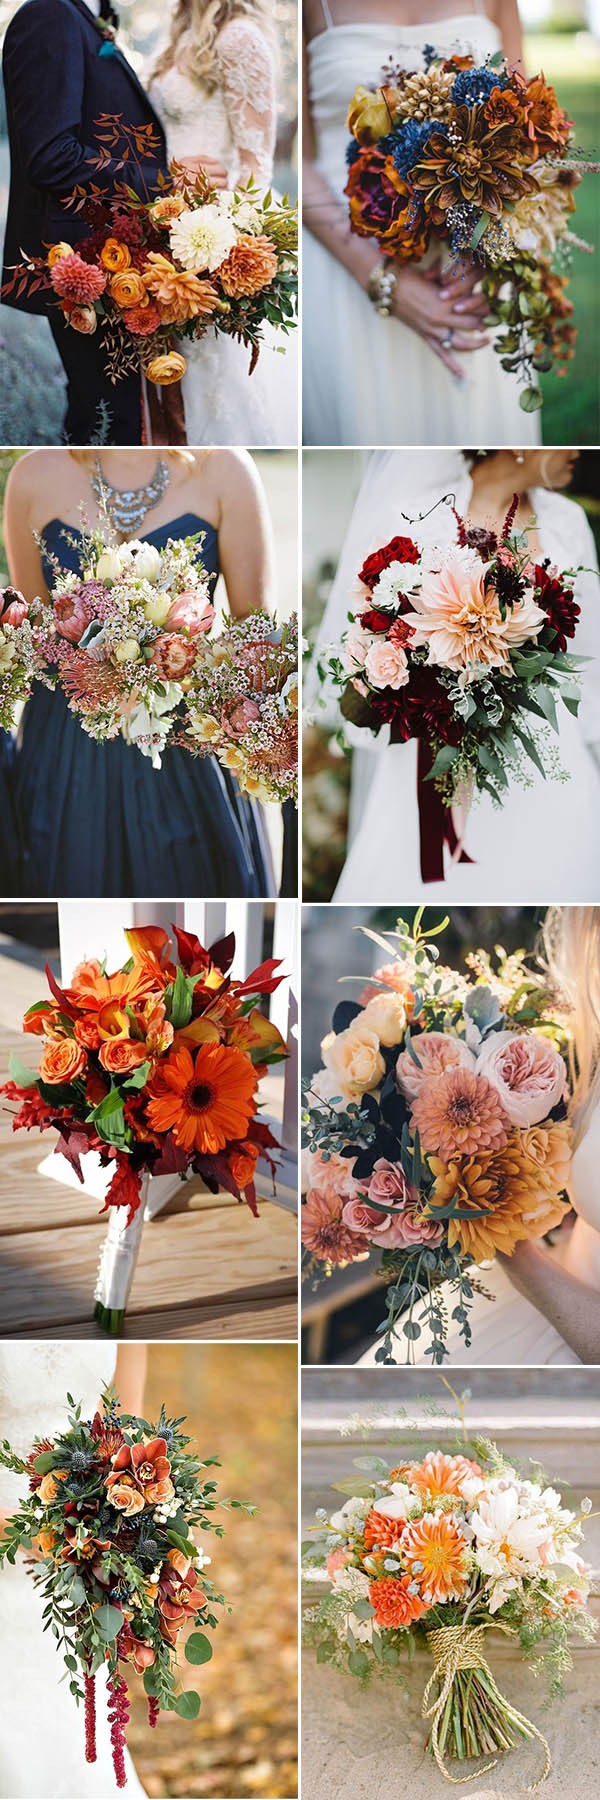 fall wedding bouquets ideas for all brides